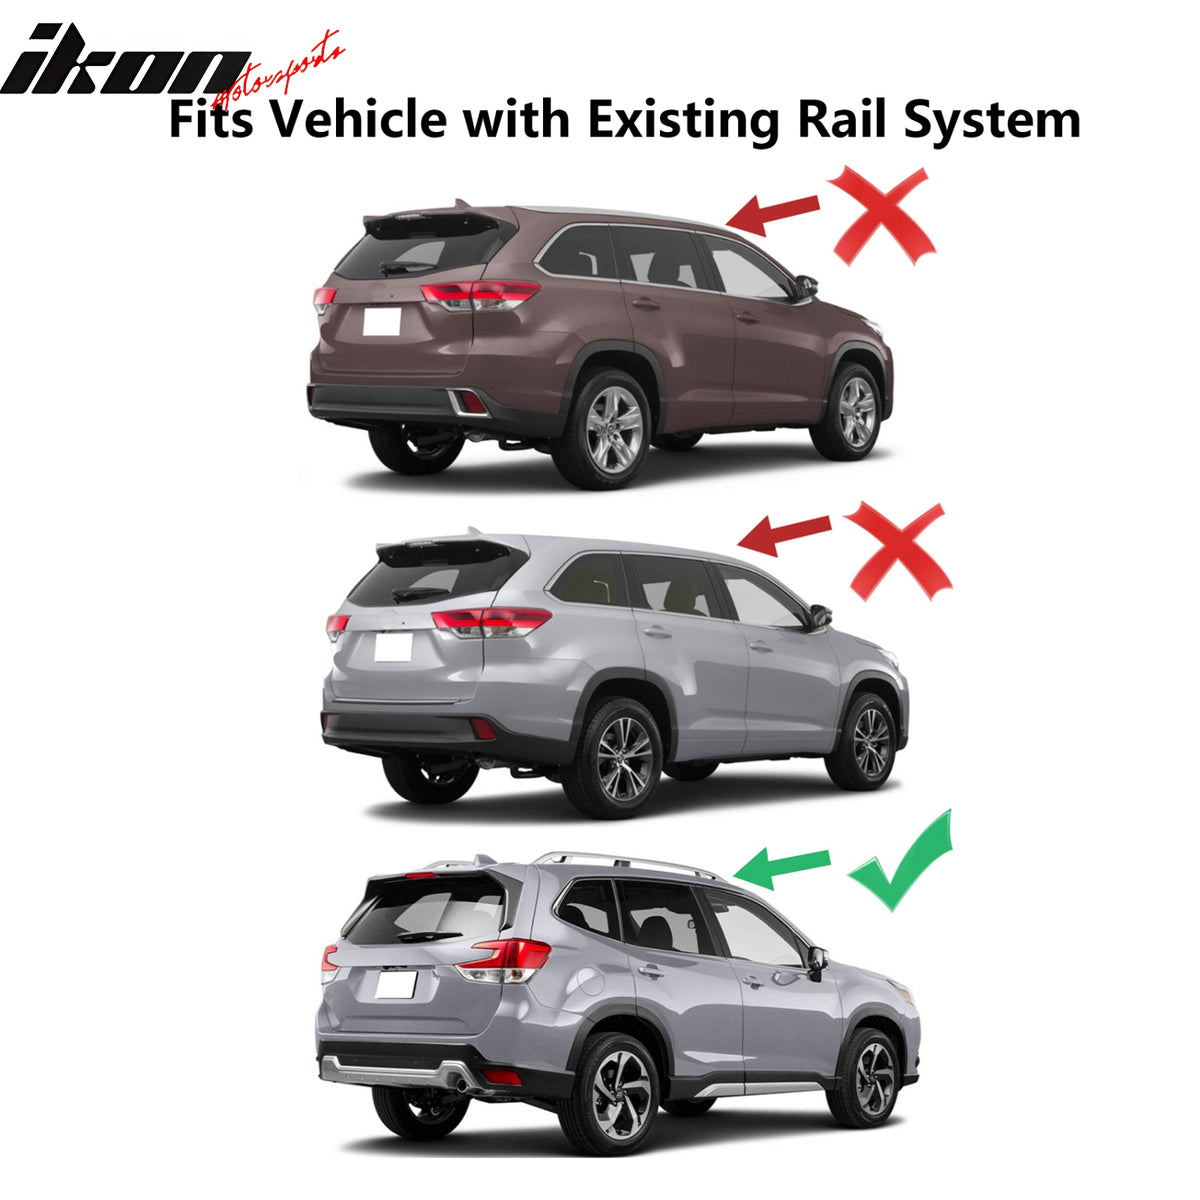 48" Universal Car SUV Top Roof Rack Cargo Luggage Carrier Cross Bar with Lock